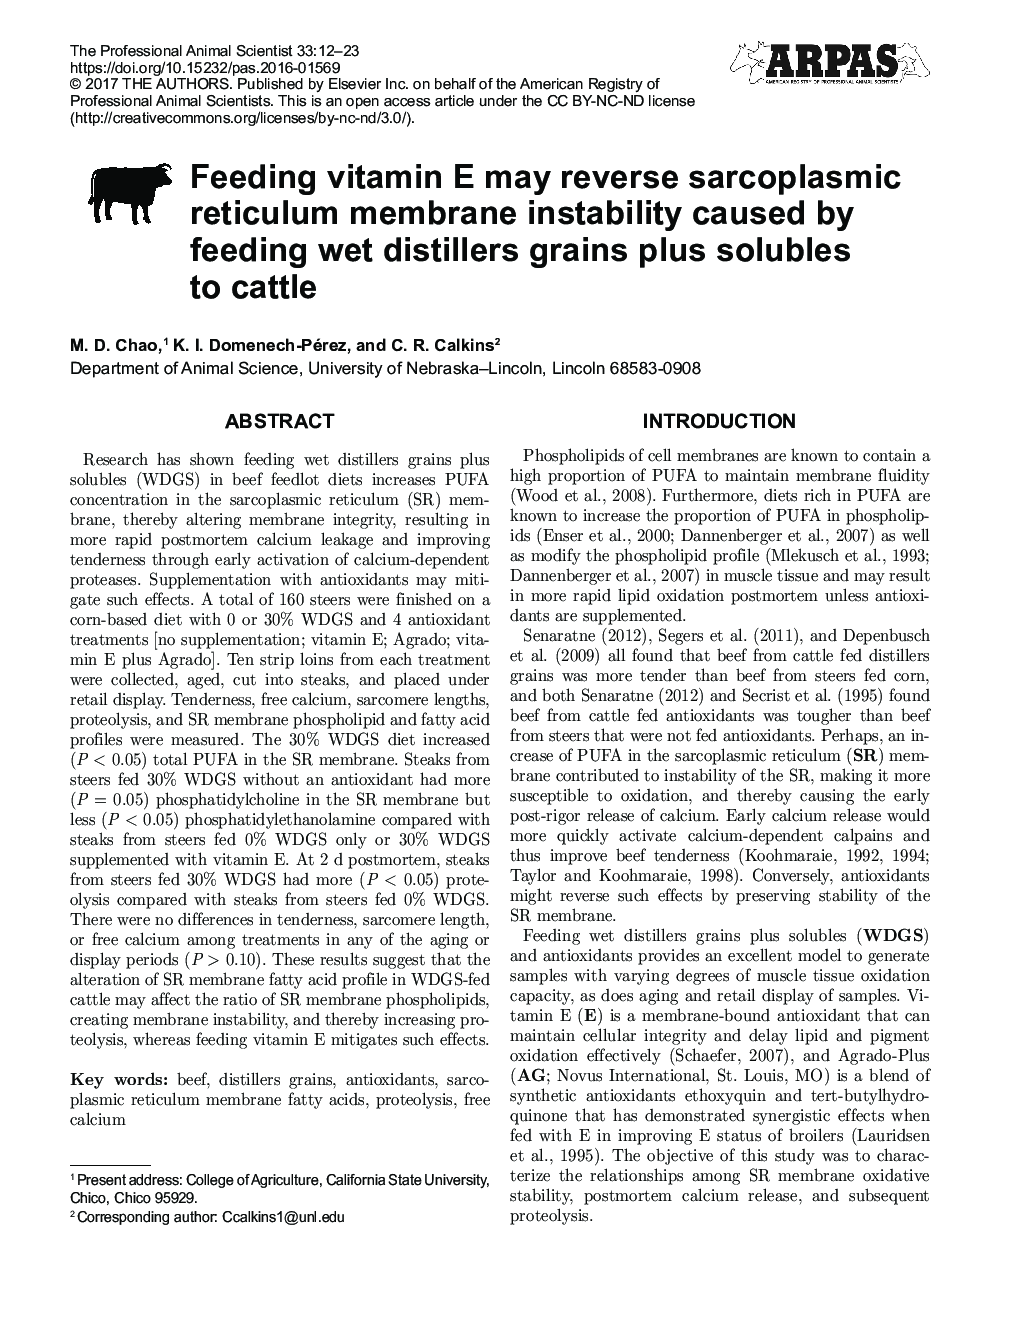 Feeding vitamin E may reverse sarcoplasmic reticulum membrane instability caused by feeding wet distillers grains plus solubles to cattle